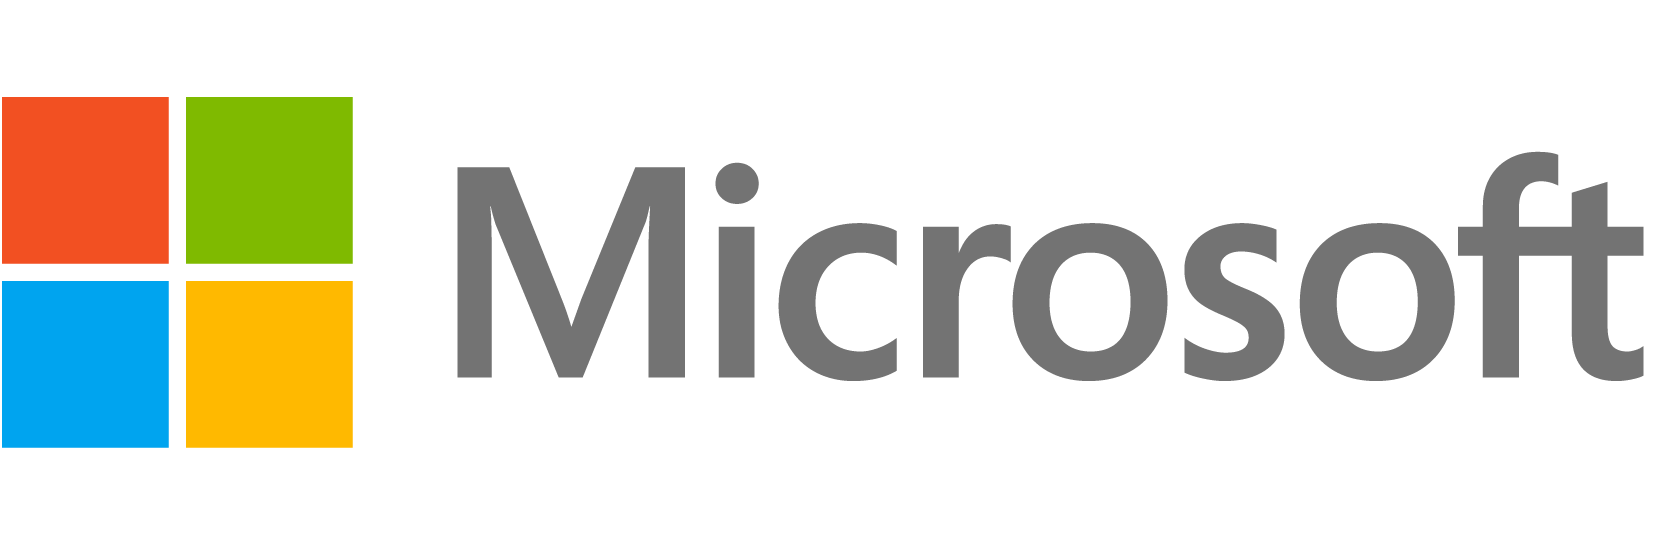 First Microsoft Logo - Microsoft Logo, Microsoft Symbol, Meaning, History and Evolution